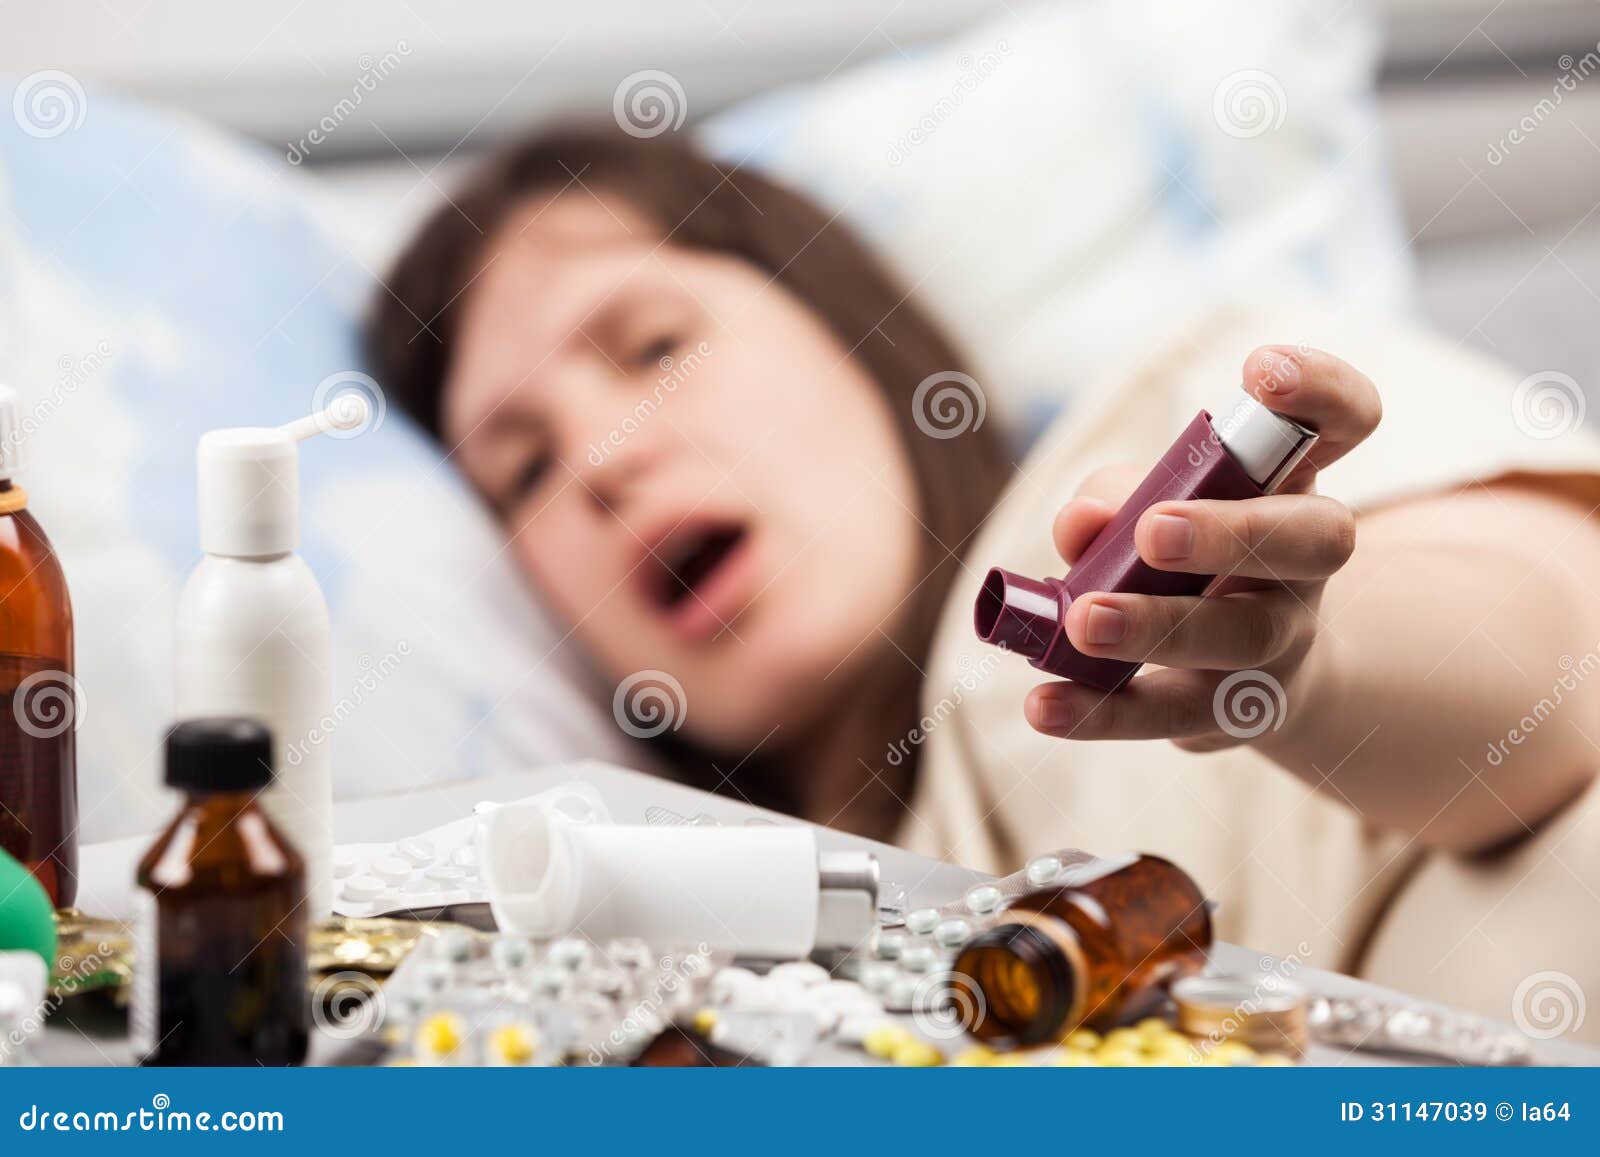 woman patient in bed hand holding asthmatic inhaler